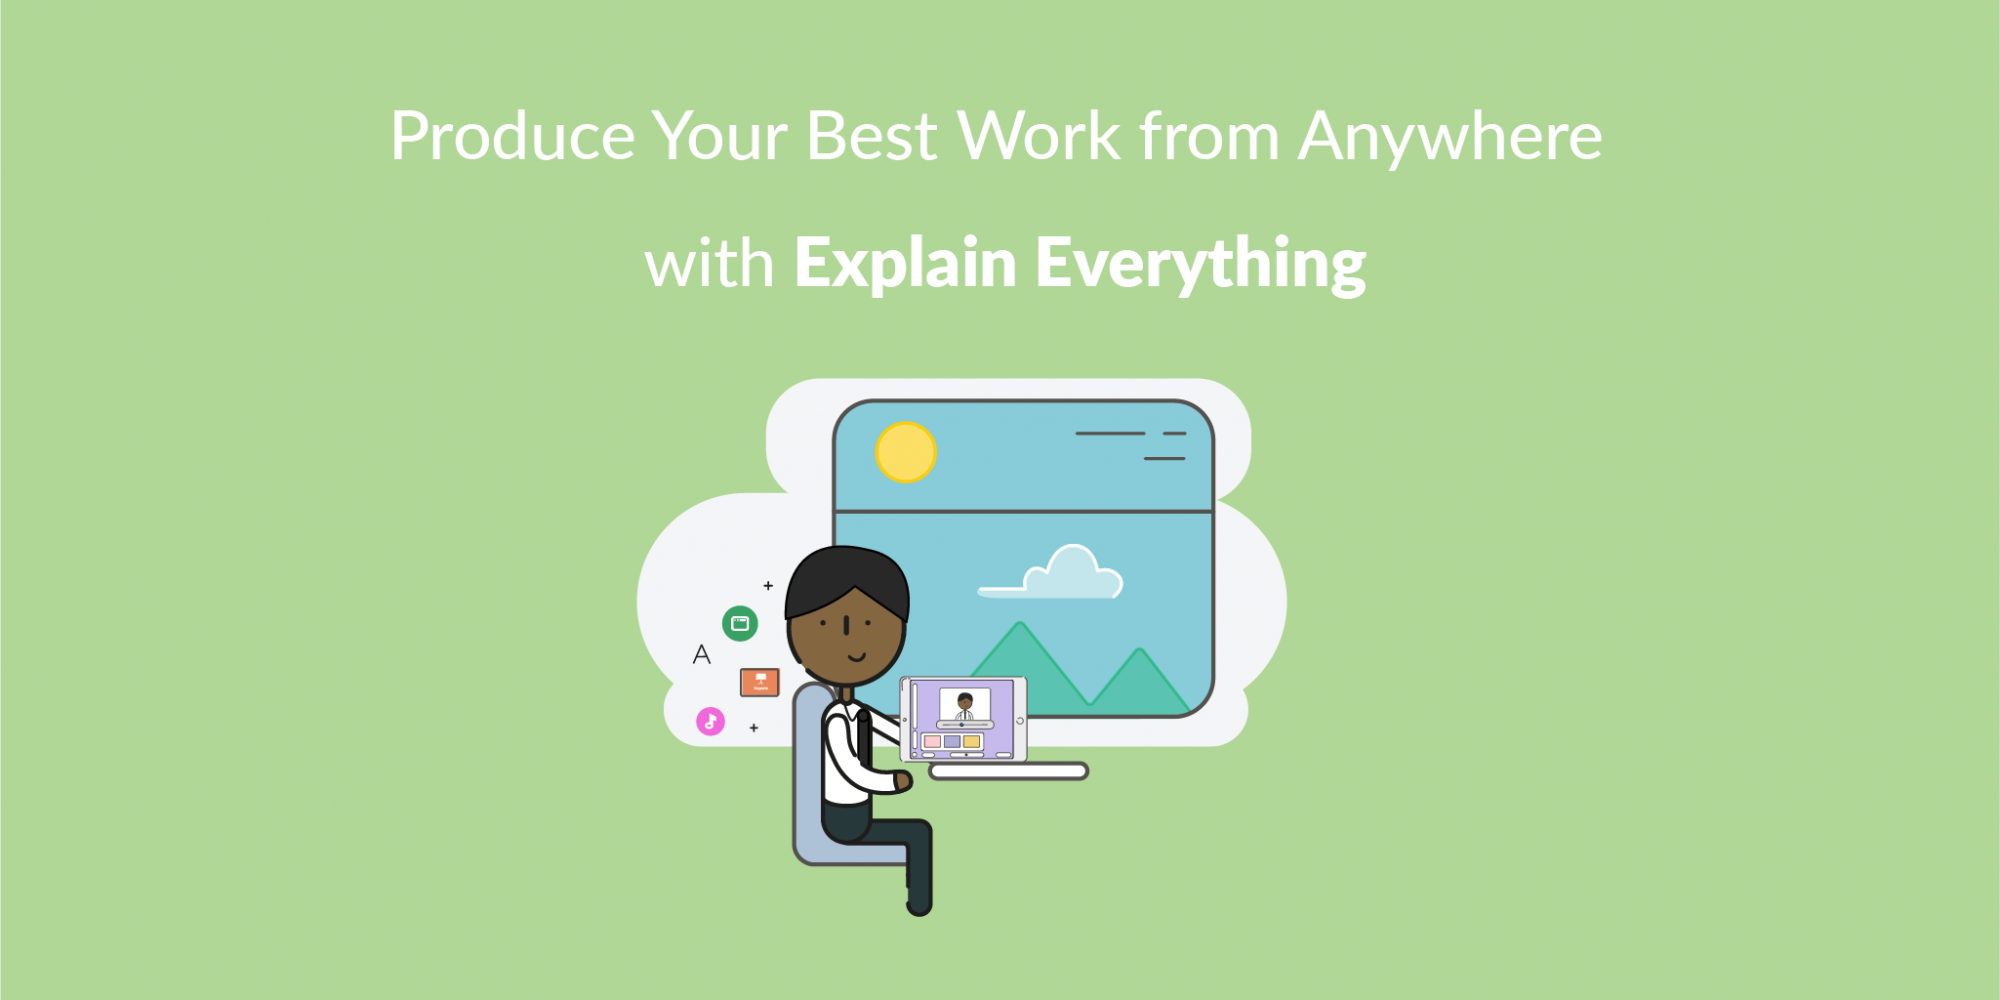 Produce Your Best Work from Anywhere with Explain Everything